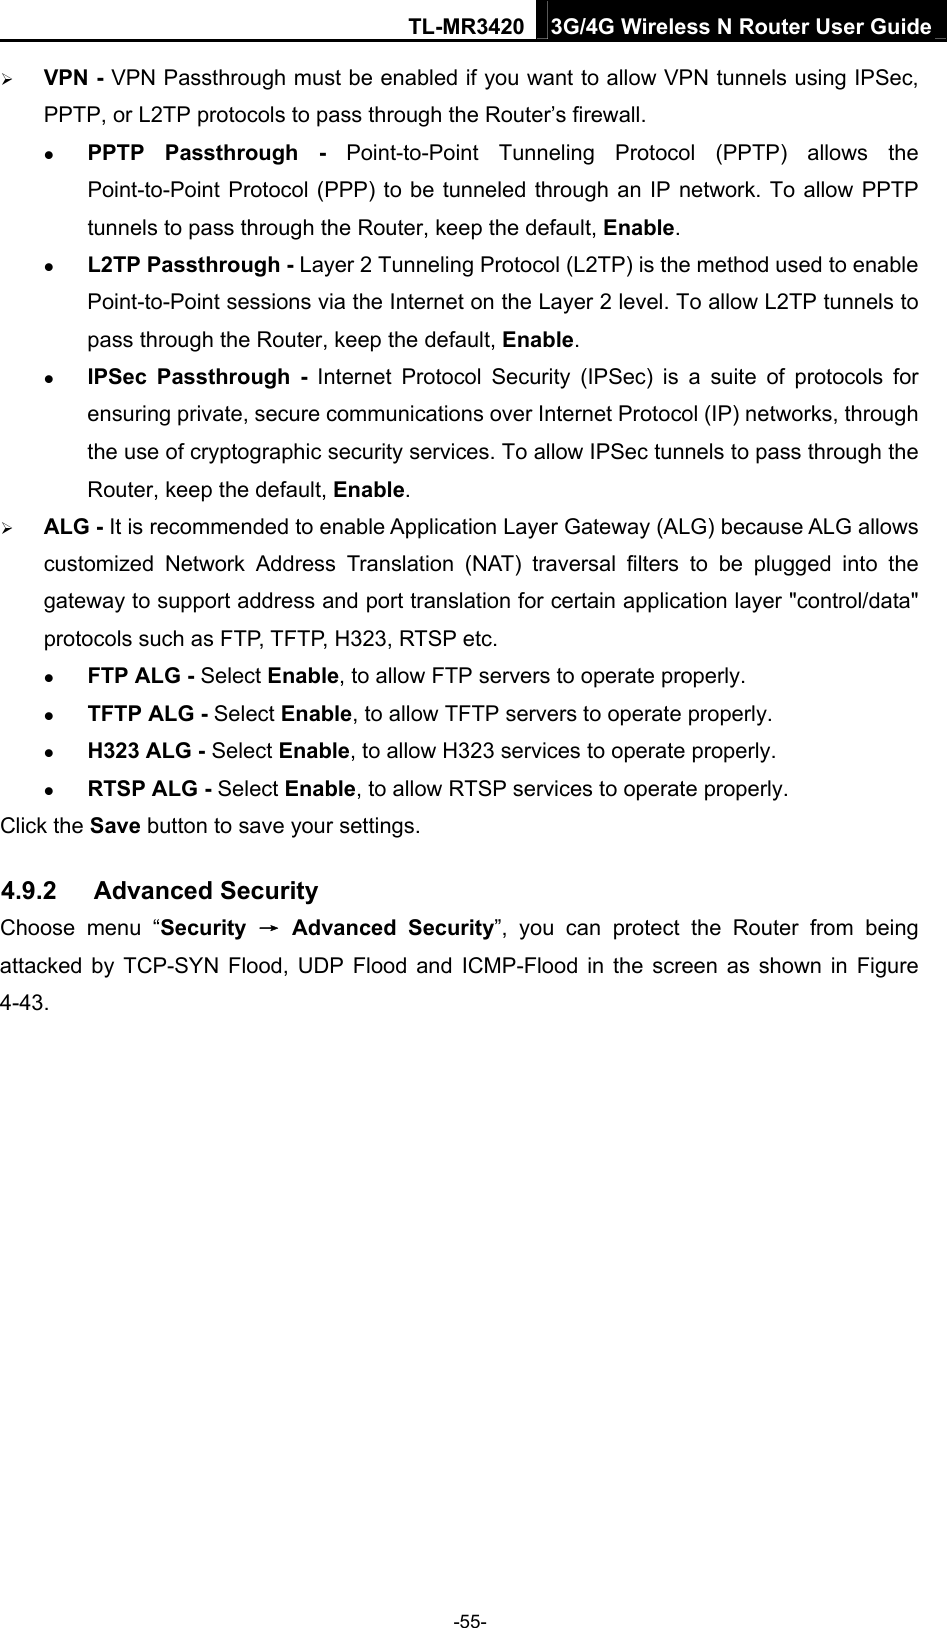 TL-MR3420 3G/4G Wireless N Router User Guide  VPN - VPN Passthrough must be enabled if you want to allow VPN tunnels using IPSec, PPTP, or L2TP protocols to pass through the Router’s firewall.  PPTP Passthrough - Point-to-Point Tunneling Protocol (PPTP) allows the Point-to-Point Protocol (PPP) to be tunneled through an IP network. To allow PPTP tunnels to pass through the Router, keep the default, Enable.  L2TP Passthrough - Layer 2 Tunneling Protocol (L2TP) is the method used to enable Point-to-Point sessions via the Internet on the Layer 2 level. To allow L2TP tunnels to pass through the Router, keep the default, Enable.  IPSec Passthrough - Internet Protocol Security (IPSec) is a suite of protocols for ensuring private, secure communications over Internet Protocol (IP) networks, through the use of cryptographic security services. To allow IPSec tunnels to pass through the Router, keep the default, Enable.  ALG - It is recommended to enable Application Layer Gateway (ALG) because ALG allows customized Network Address Translation (NAT) traversal filters to be plugged into the gateway to support address and port translation for certain application layer &quot;control/data&quot; protocols such as FTP, TFTP, H323, RTSP etc.    FTP ALG - Select Enable, to allow FTP servers to operate properly.  TFTP ALG - Select Enable, to allow TFTP servers to operate properly.  H323 ALG - Select Enable, to allow H323 services to operate properly.  RTSP ALG - Select Enable, to allow RTSP services to operate properly. Click the Save button to save your settings. 4.9.2  Advanced Security Choose menu “Security  → Advanced Security”, you can protect the Router from being attacked by TCP-SYN Flood, UDP Flood and ICMP-Flood in the screen as shown in Figure 4-43.  -55- 